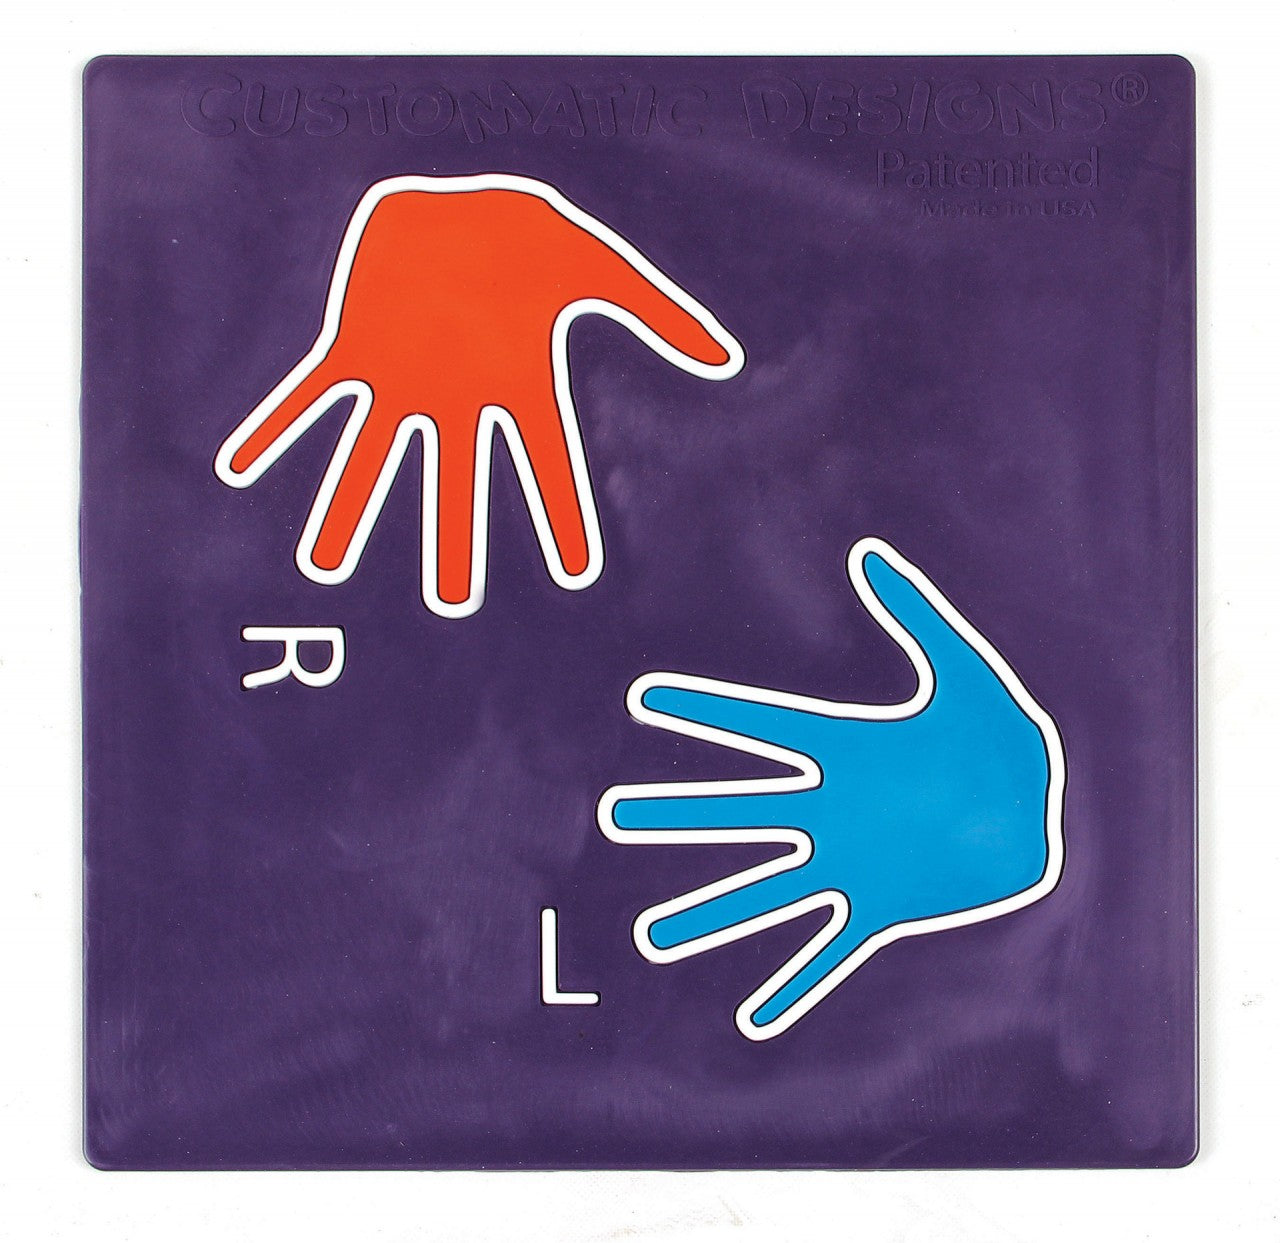 Poly Pad "Round Off Hands" 18" x 18"